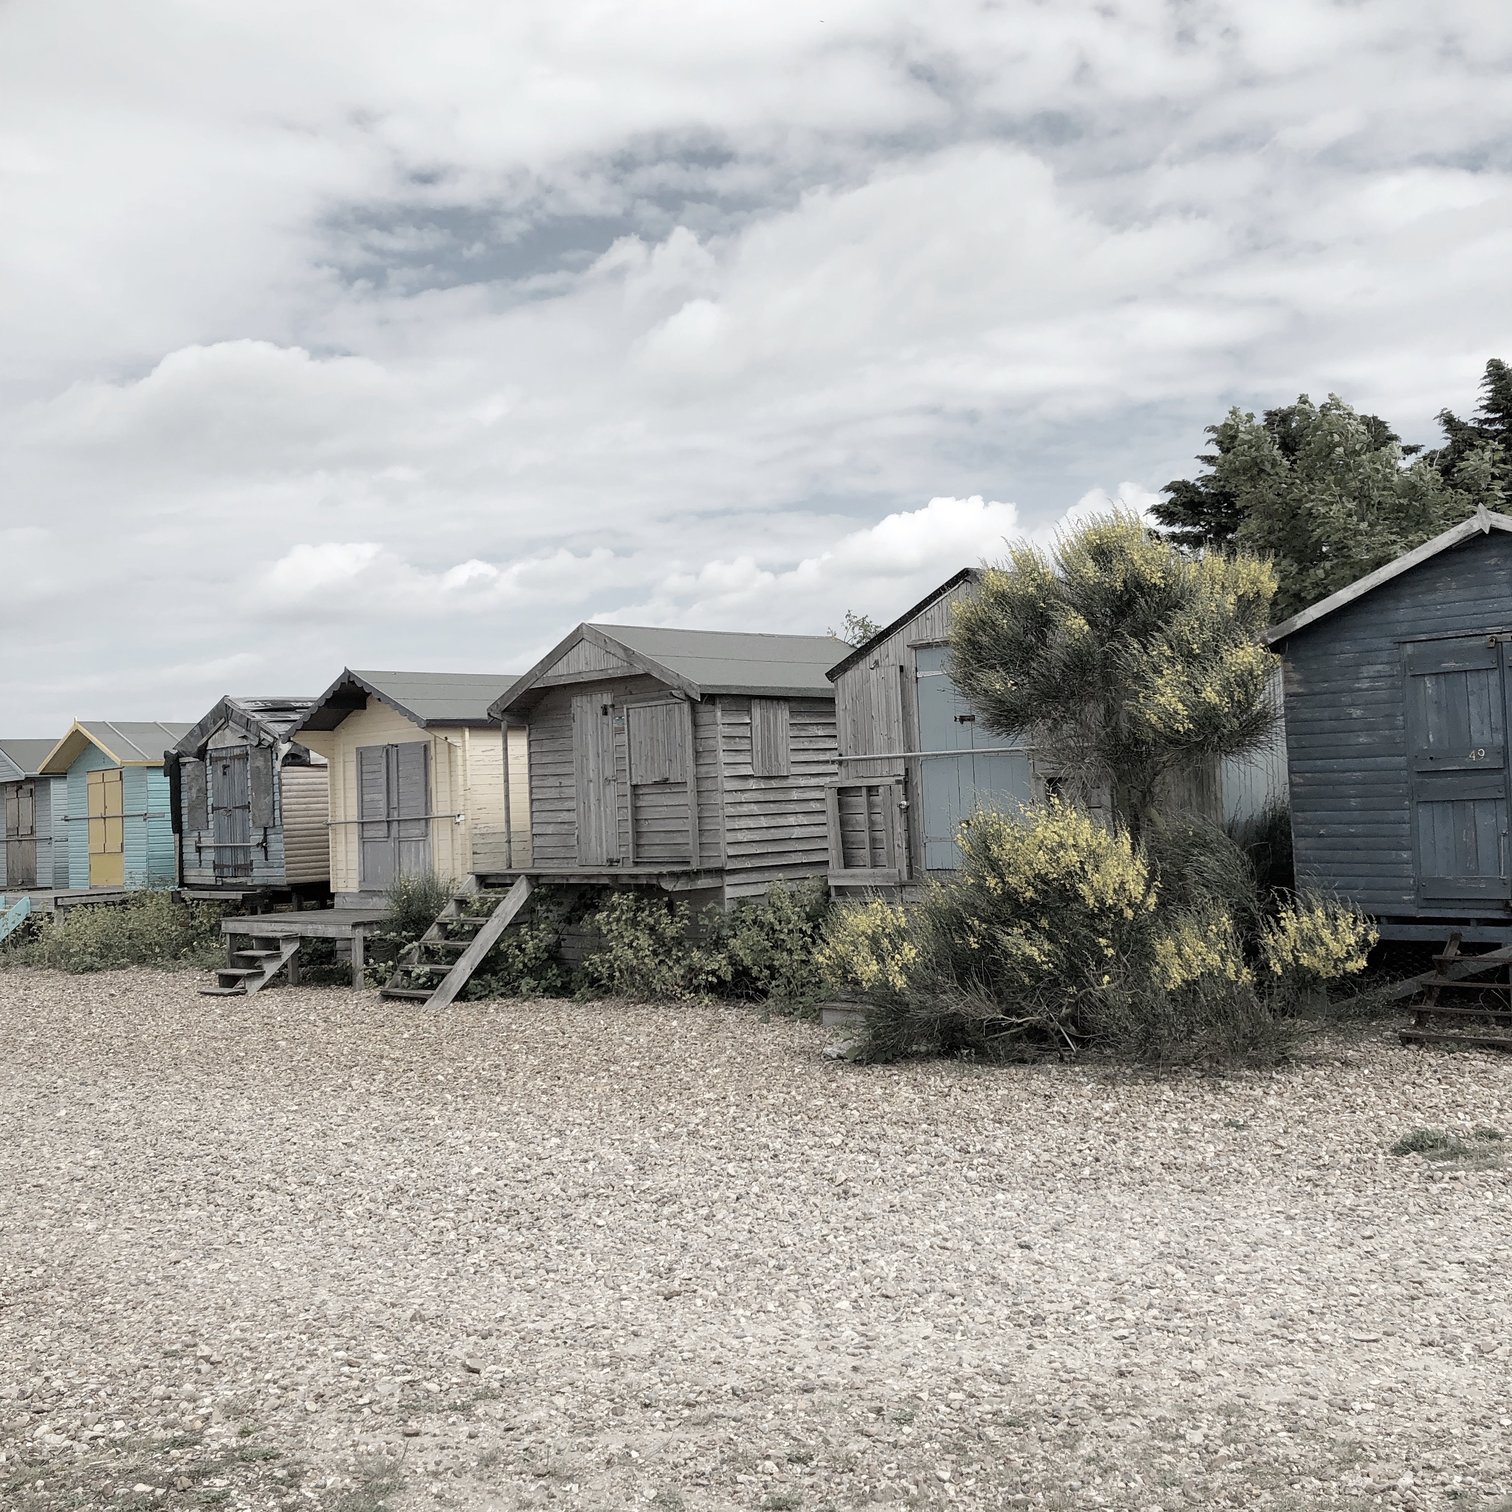 Salty Air and Seafood: A Whitstable Day Trip